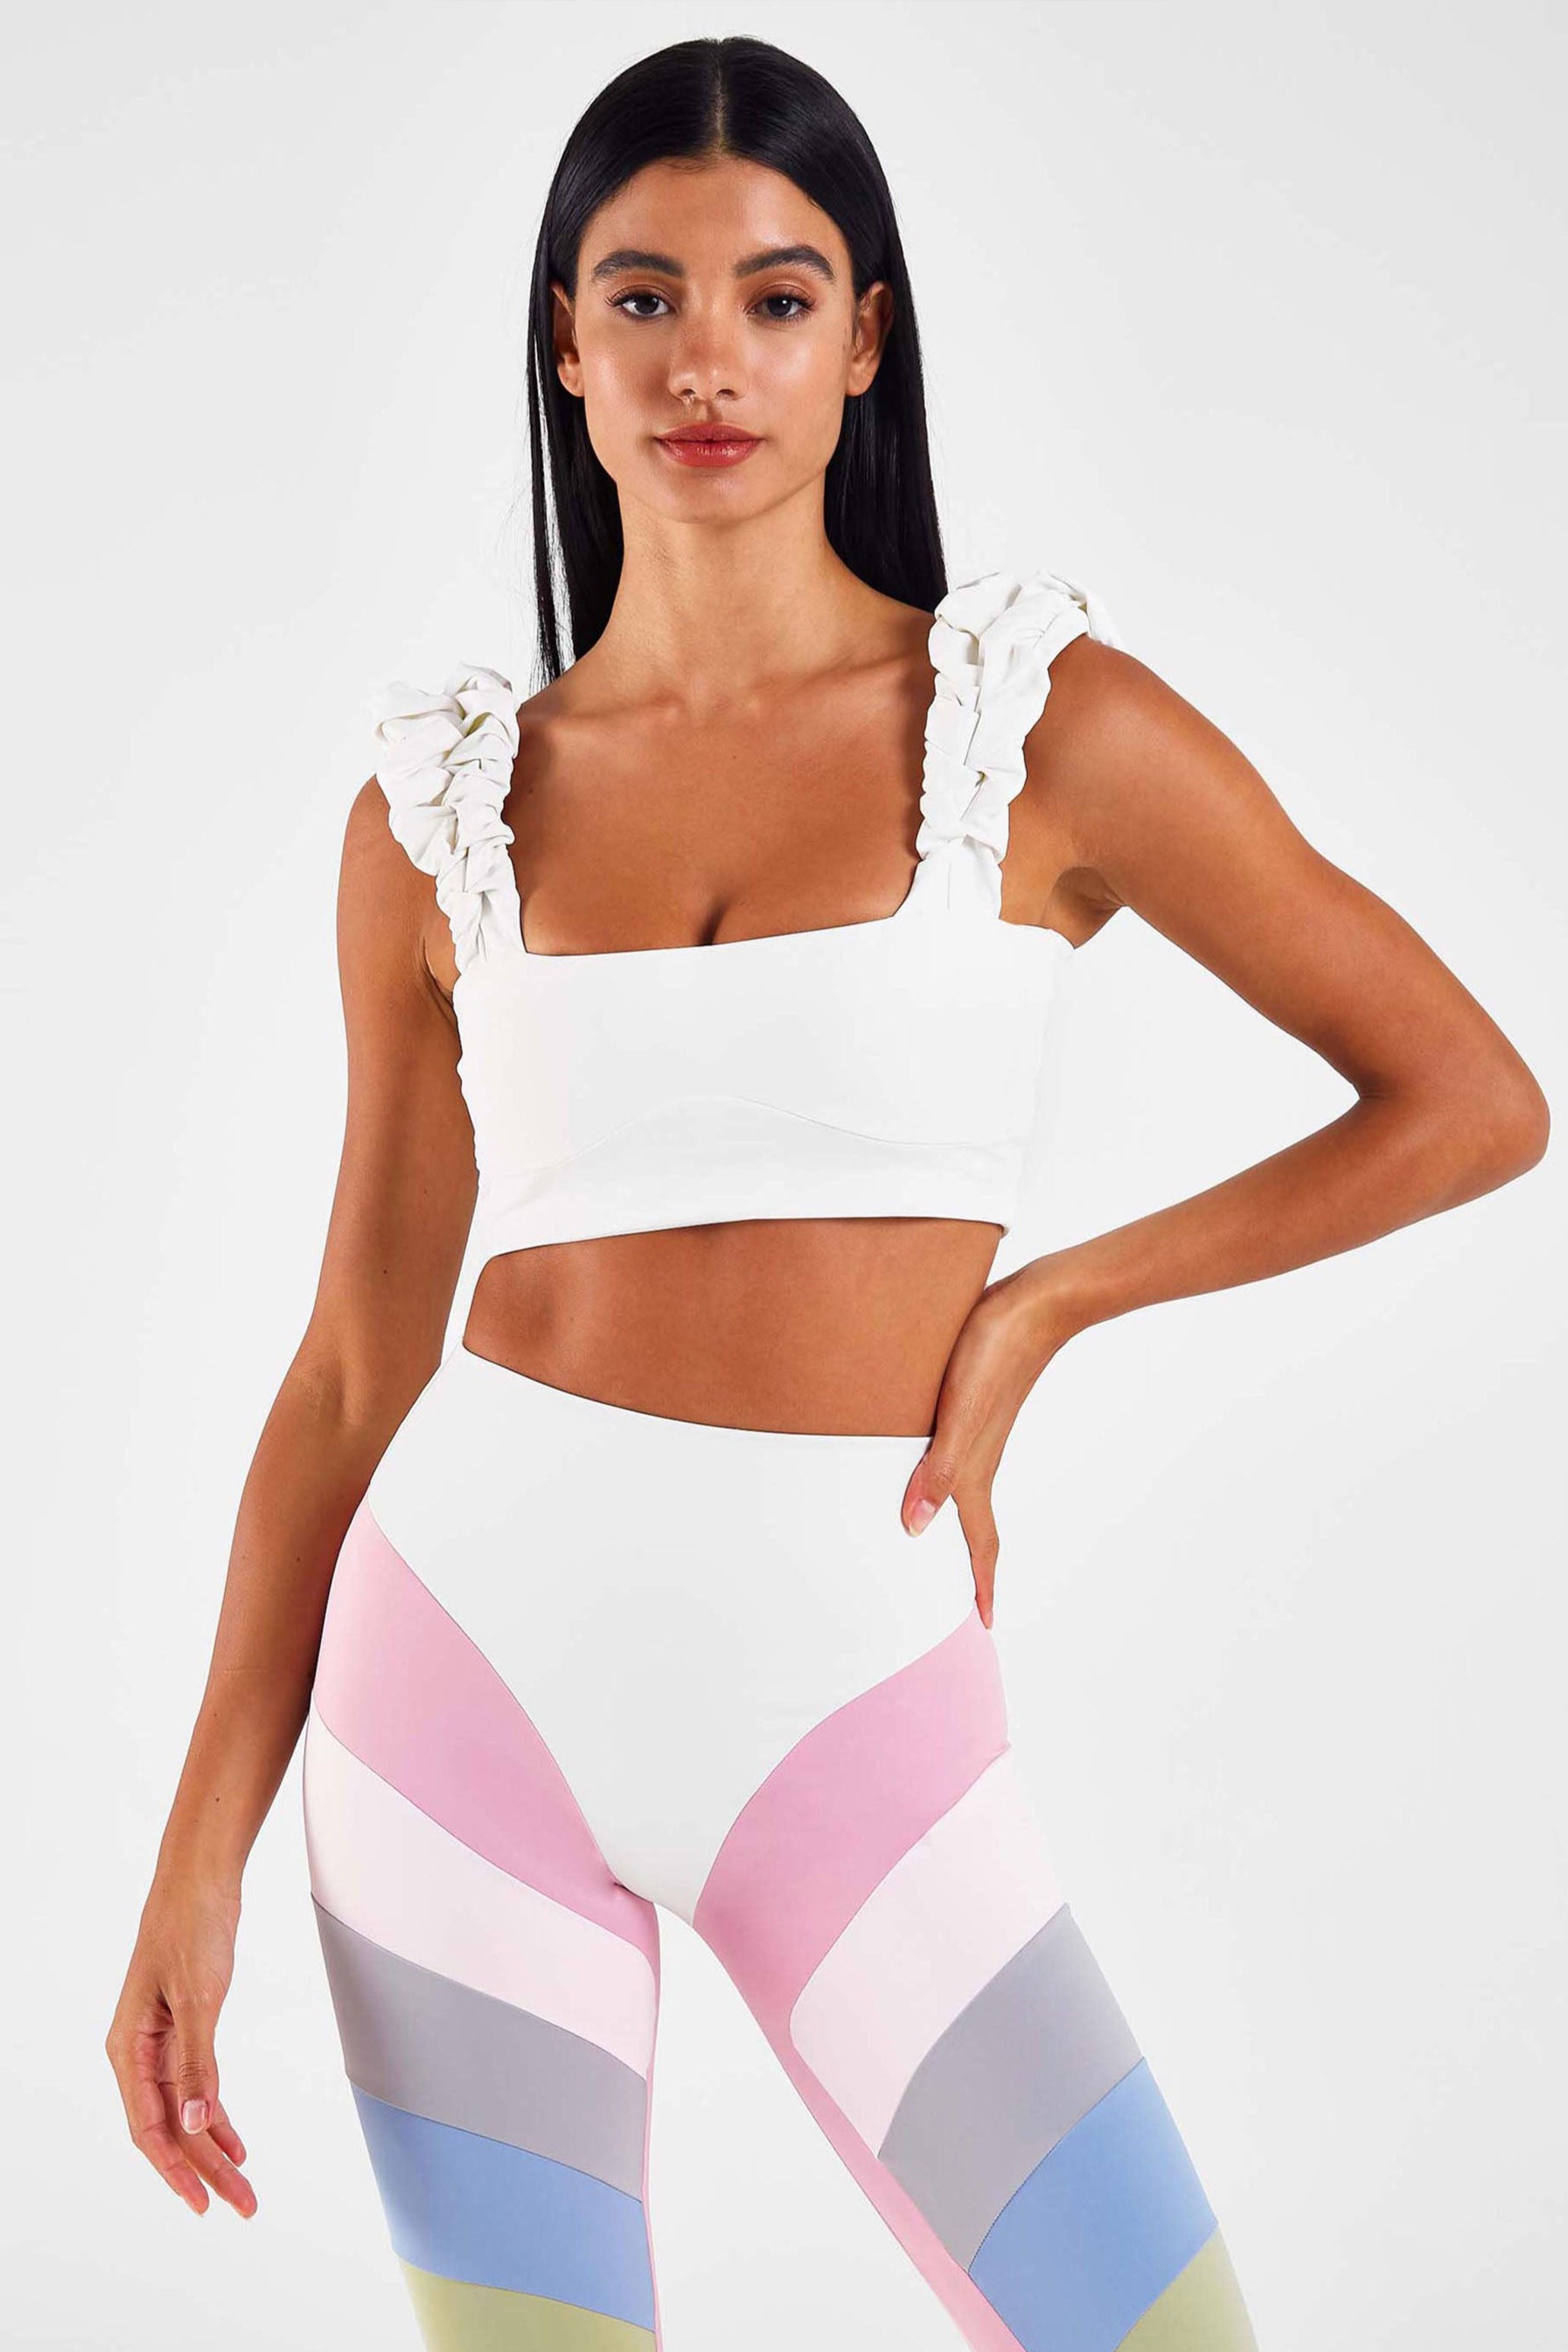 Port de Bras makes beautiful activewear you won't want to take off